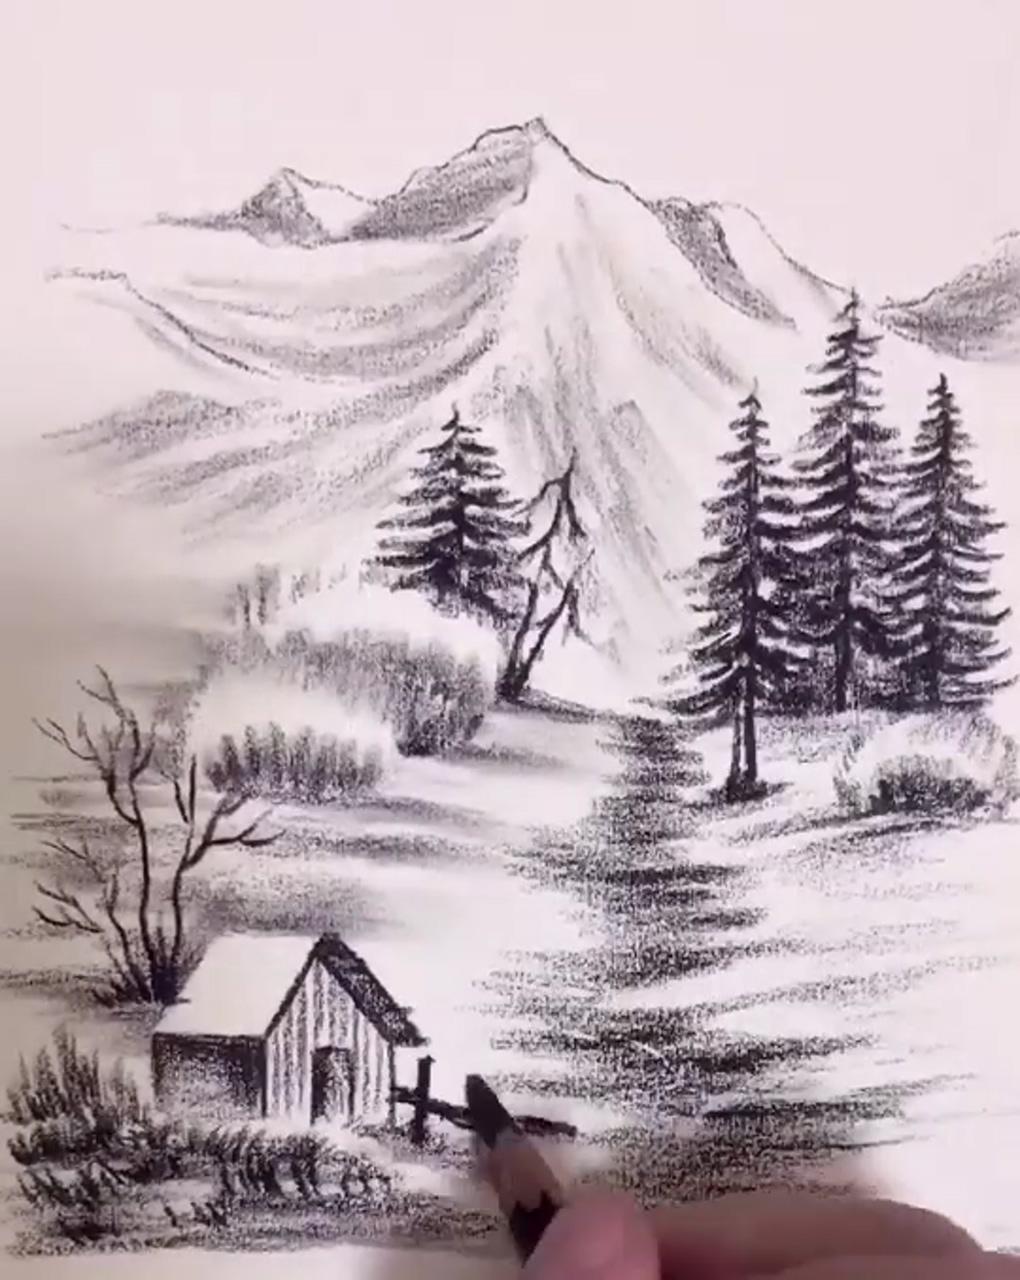 Countryside pencil art drawing; landscape pencil drawings